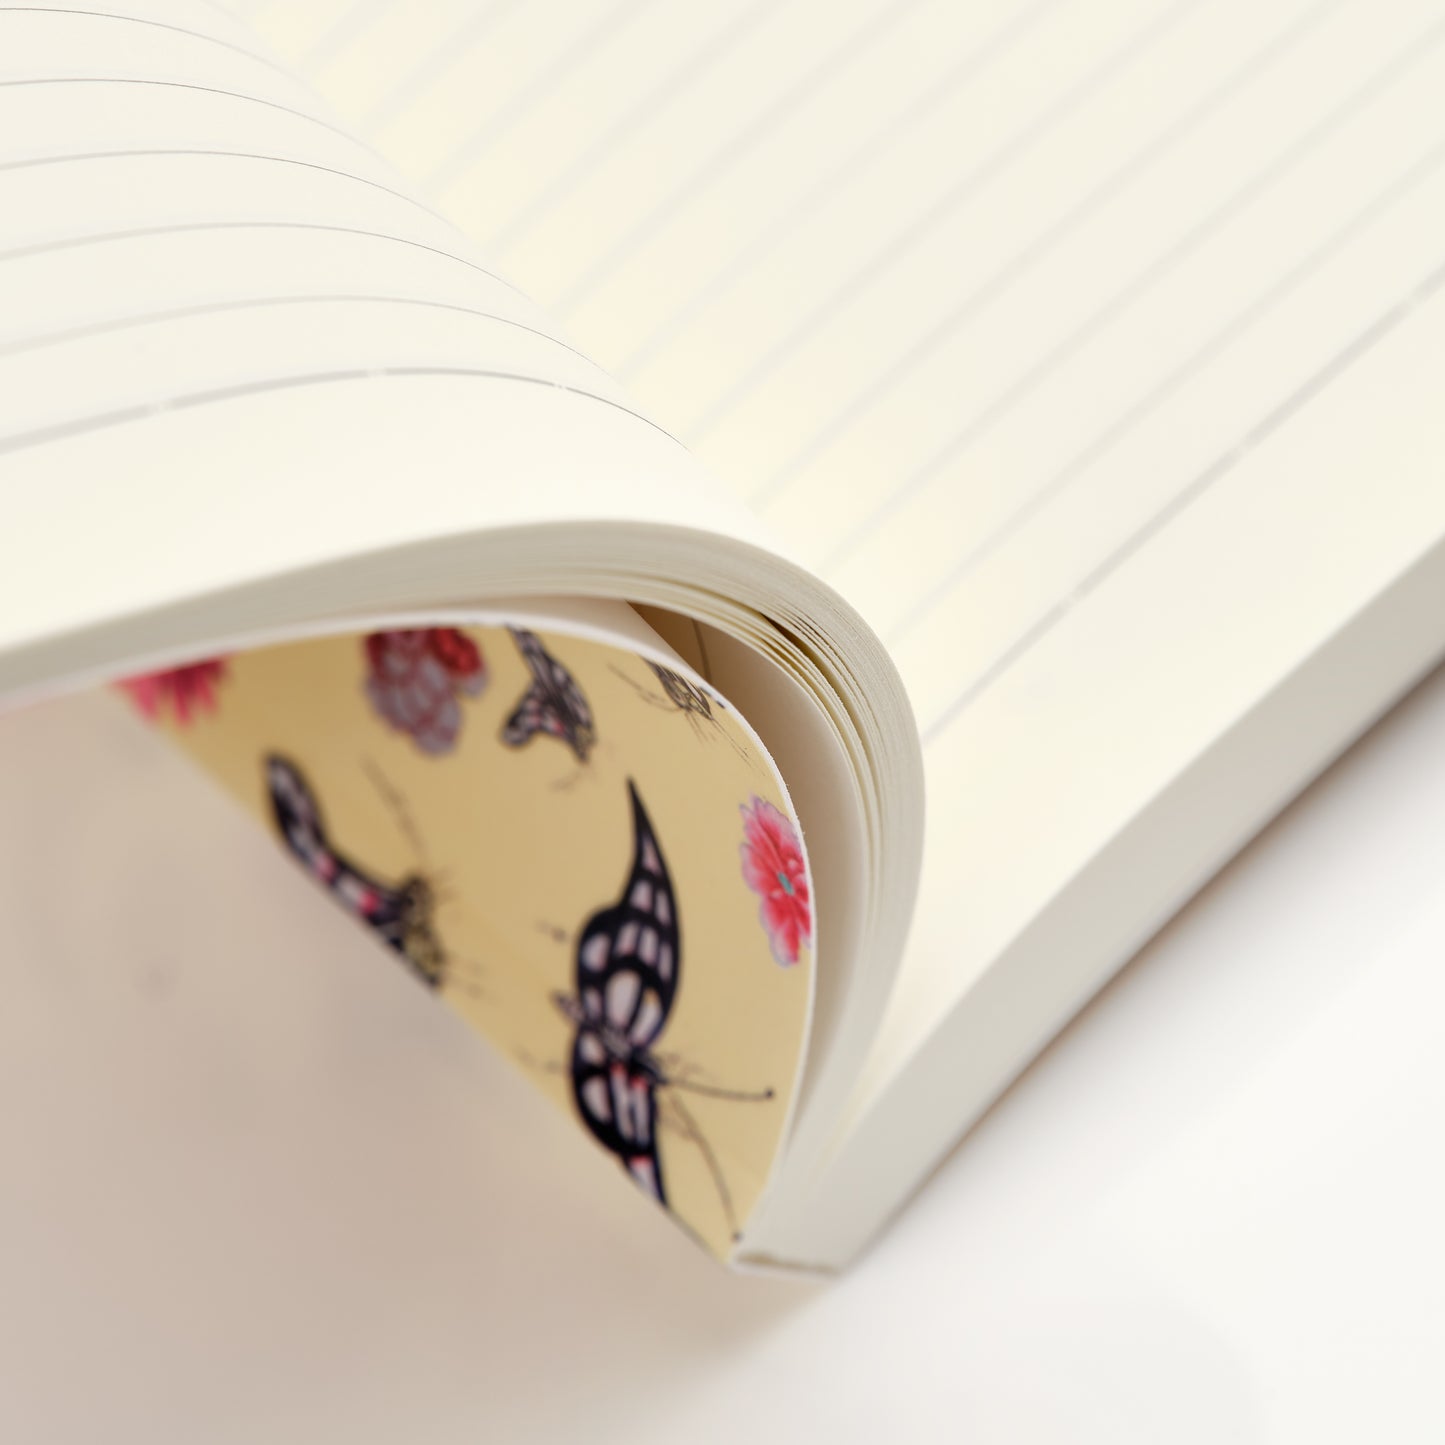 A close up of an opened journal.